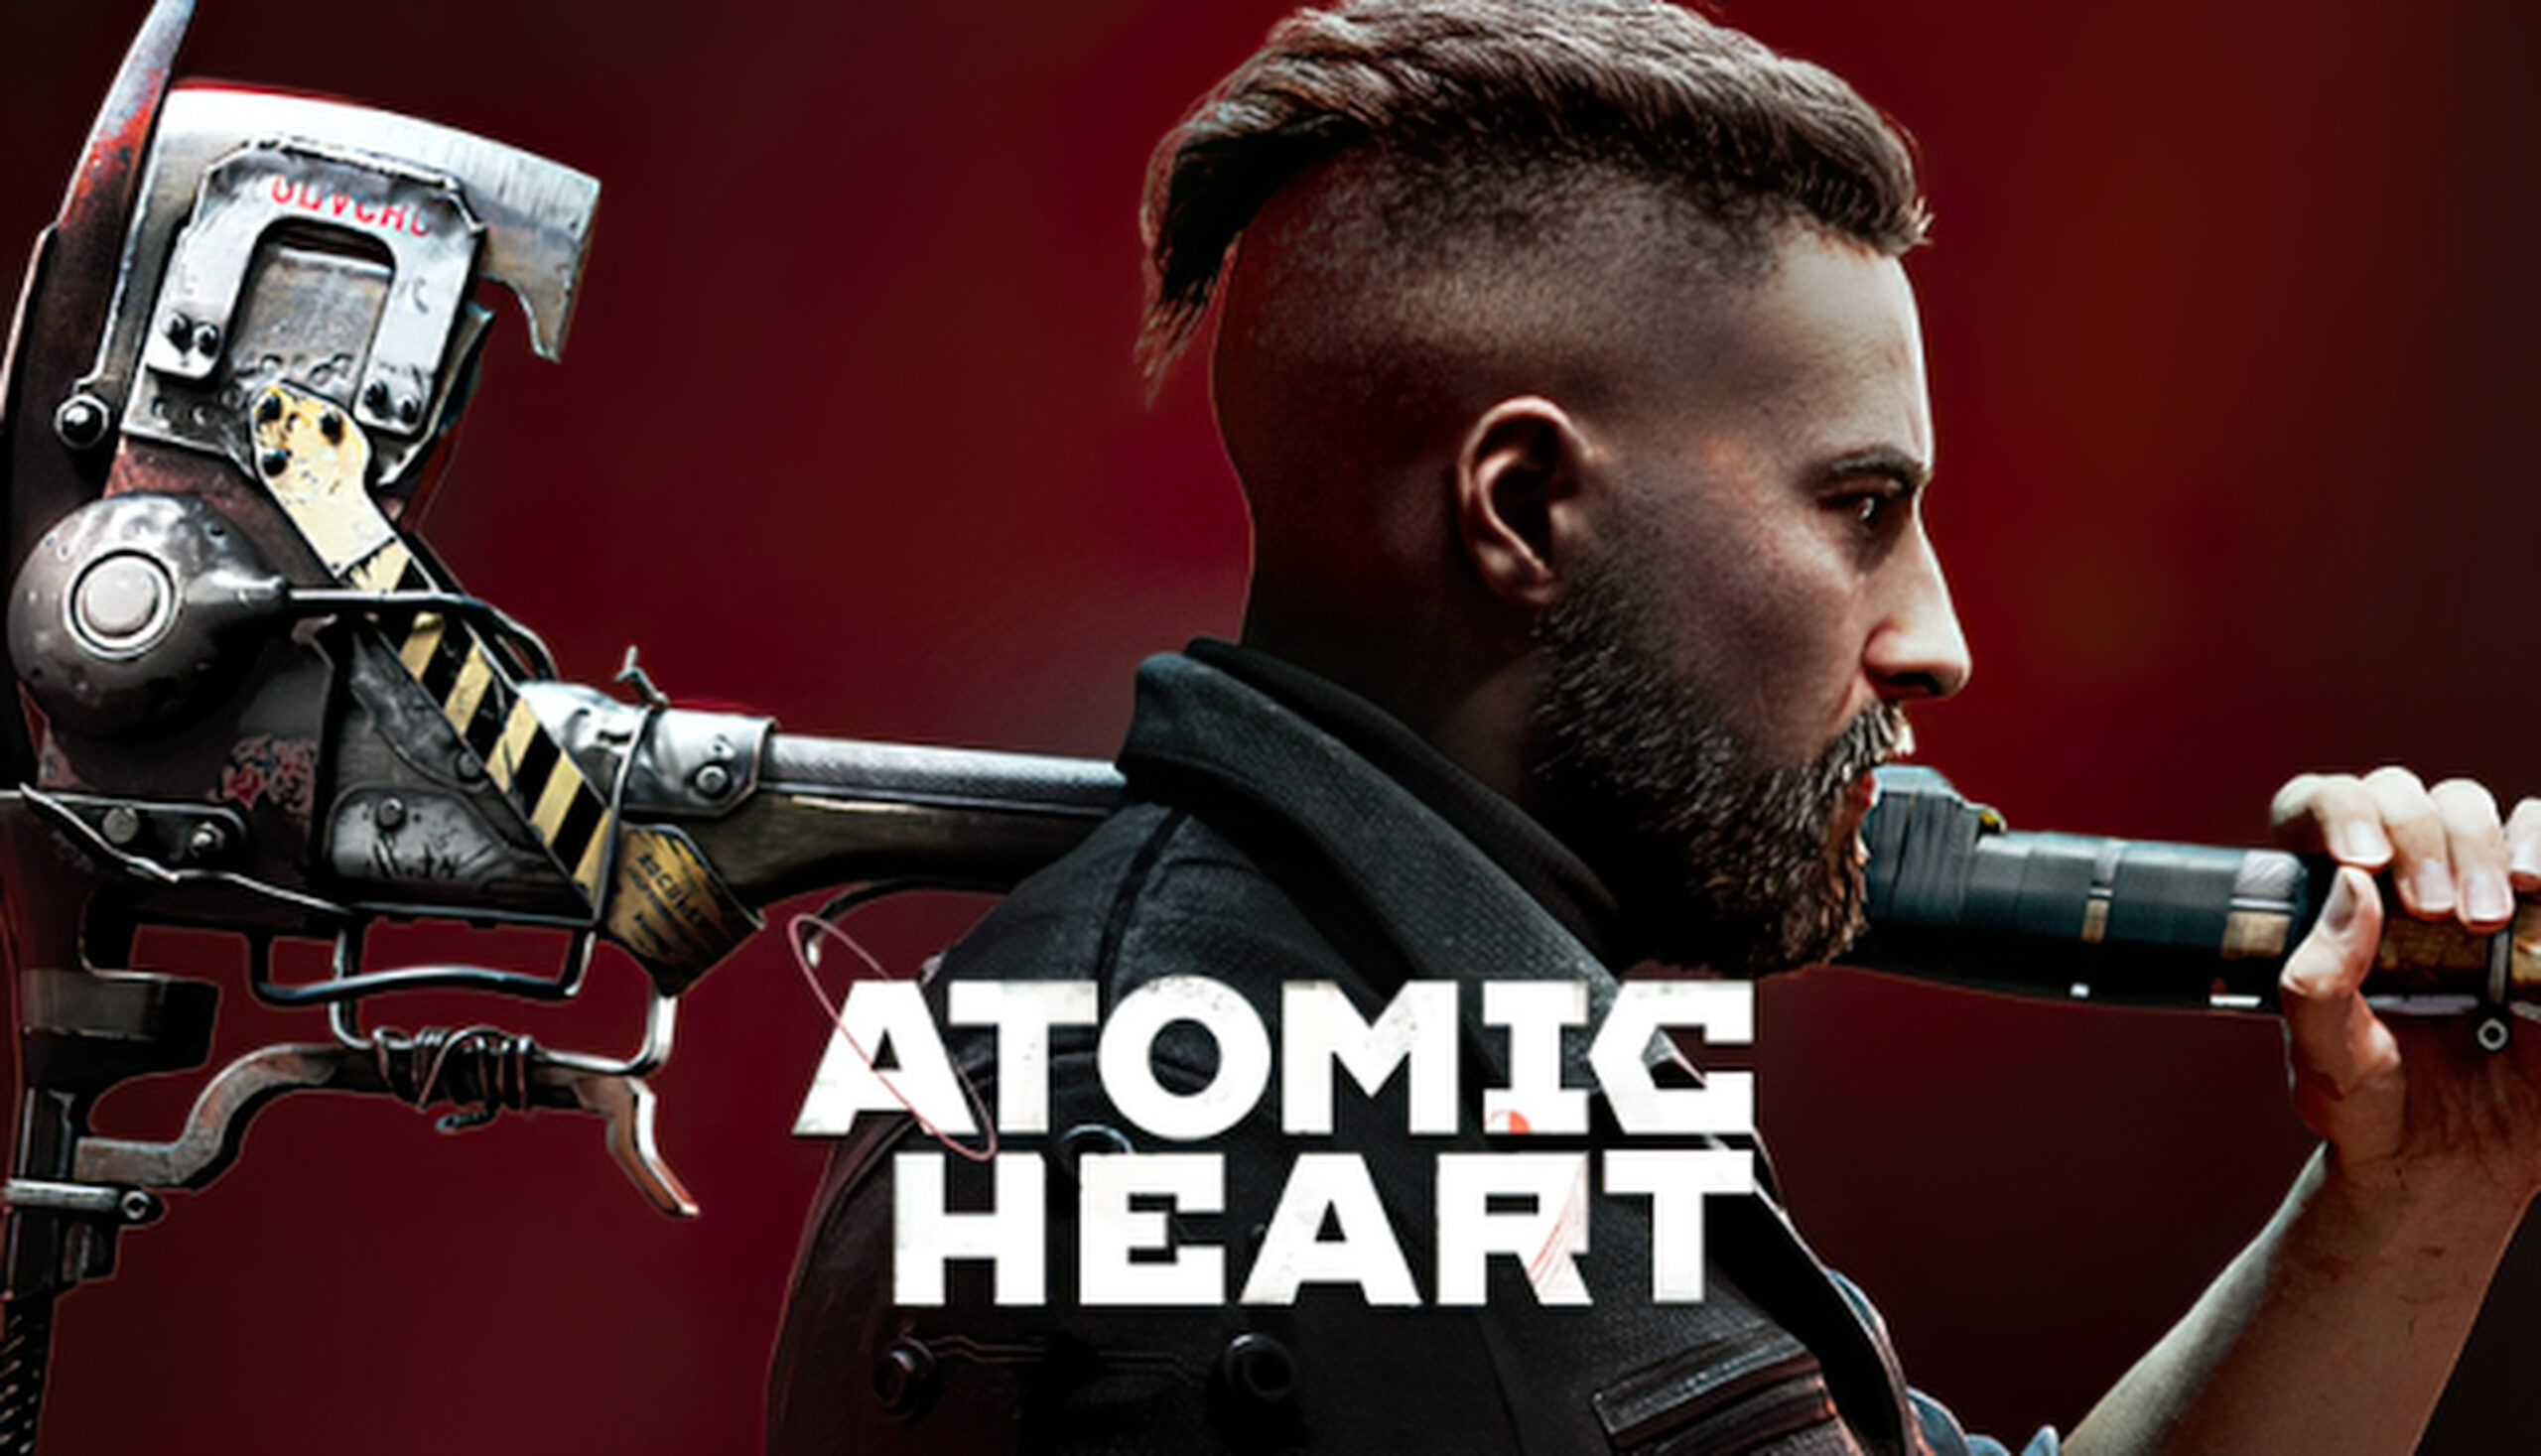 Atomic Heart Leak Shows 14 Minutes of New Gameplay